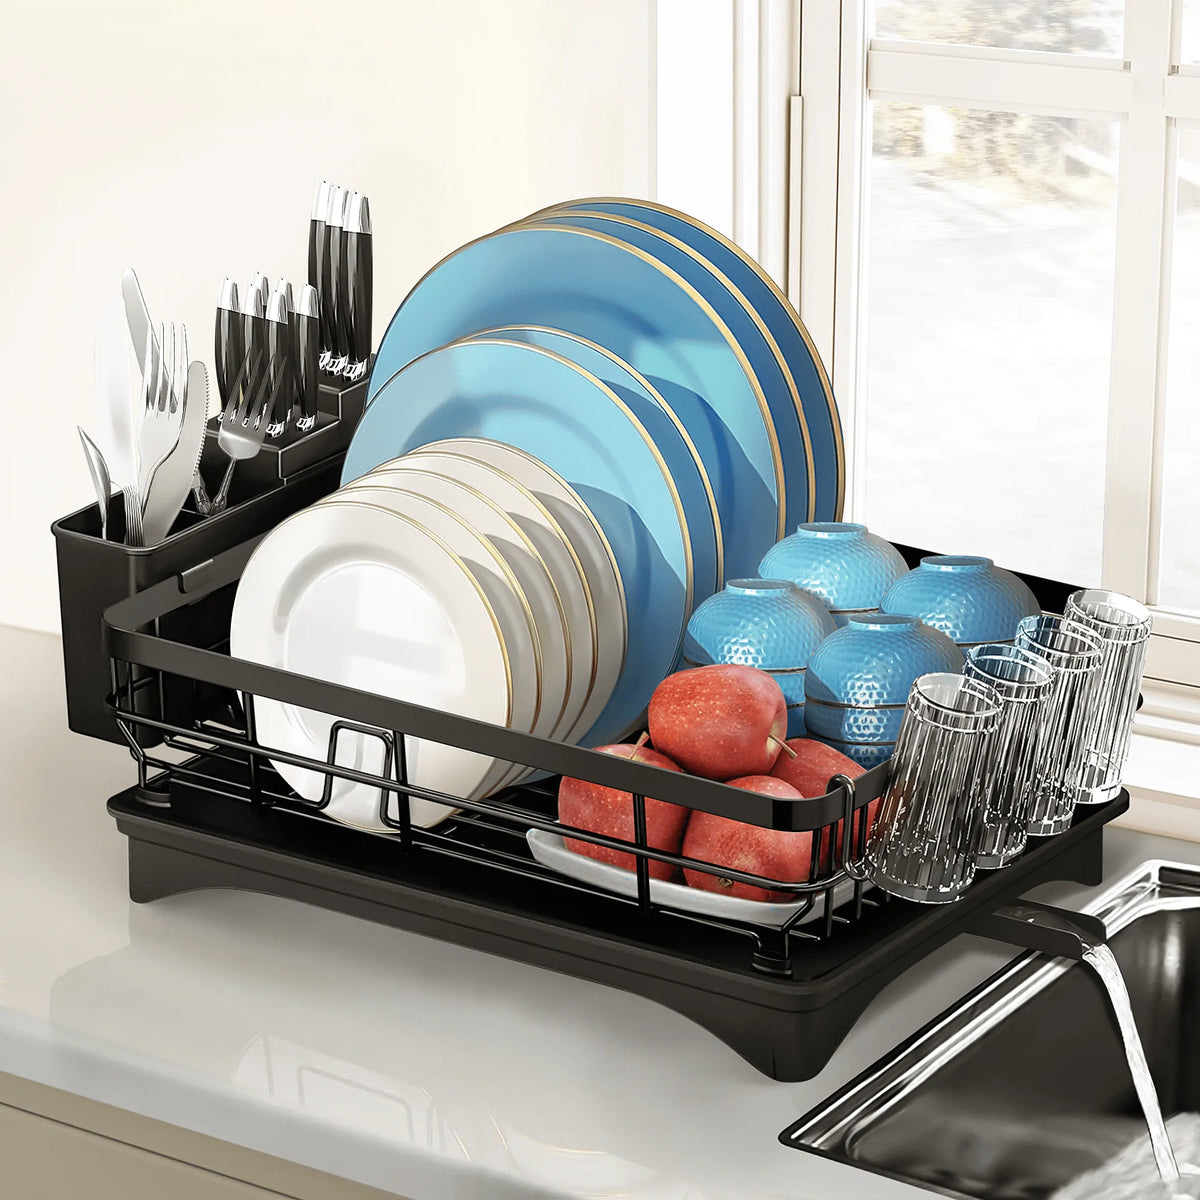 Stainless Steel Dish Rack with Drainage System -